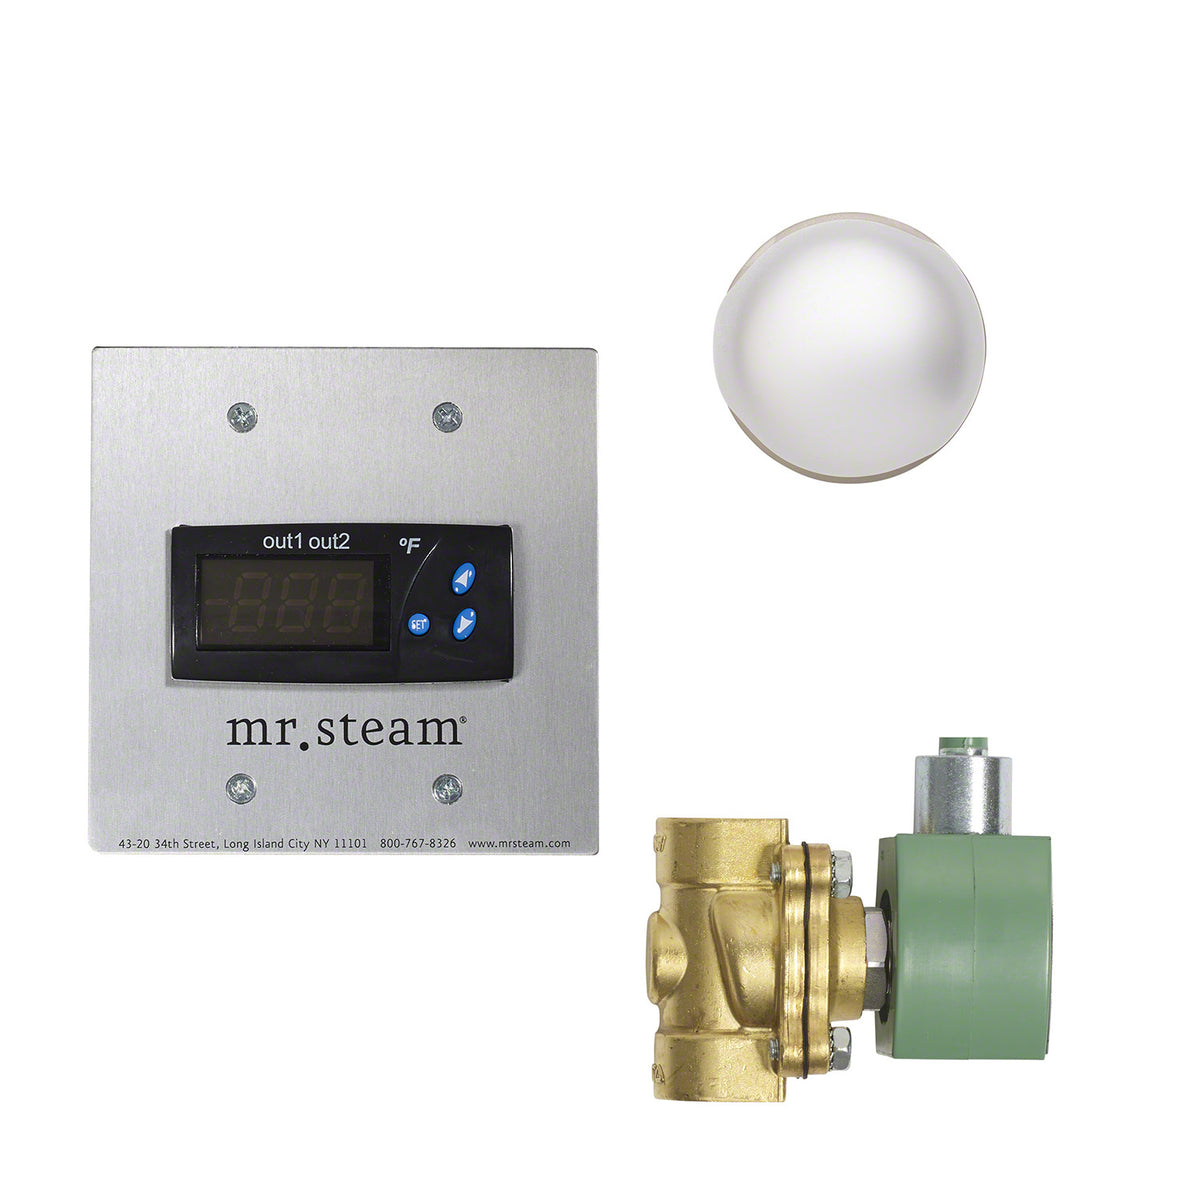 Mr. Steam CU Digital 2 Steam Shower Generator Package with Digital 2 Control in Square Polished Chrome